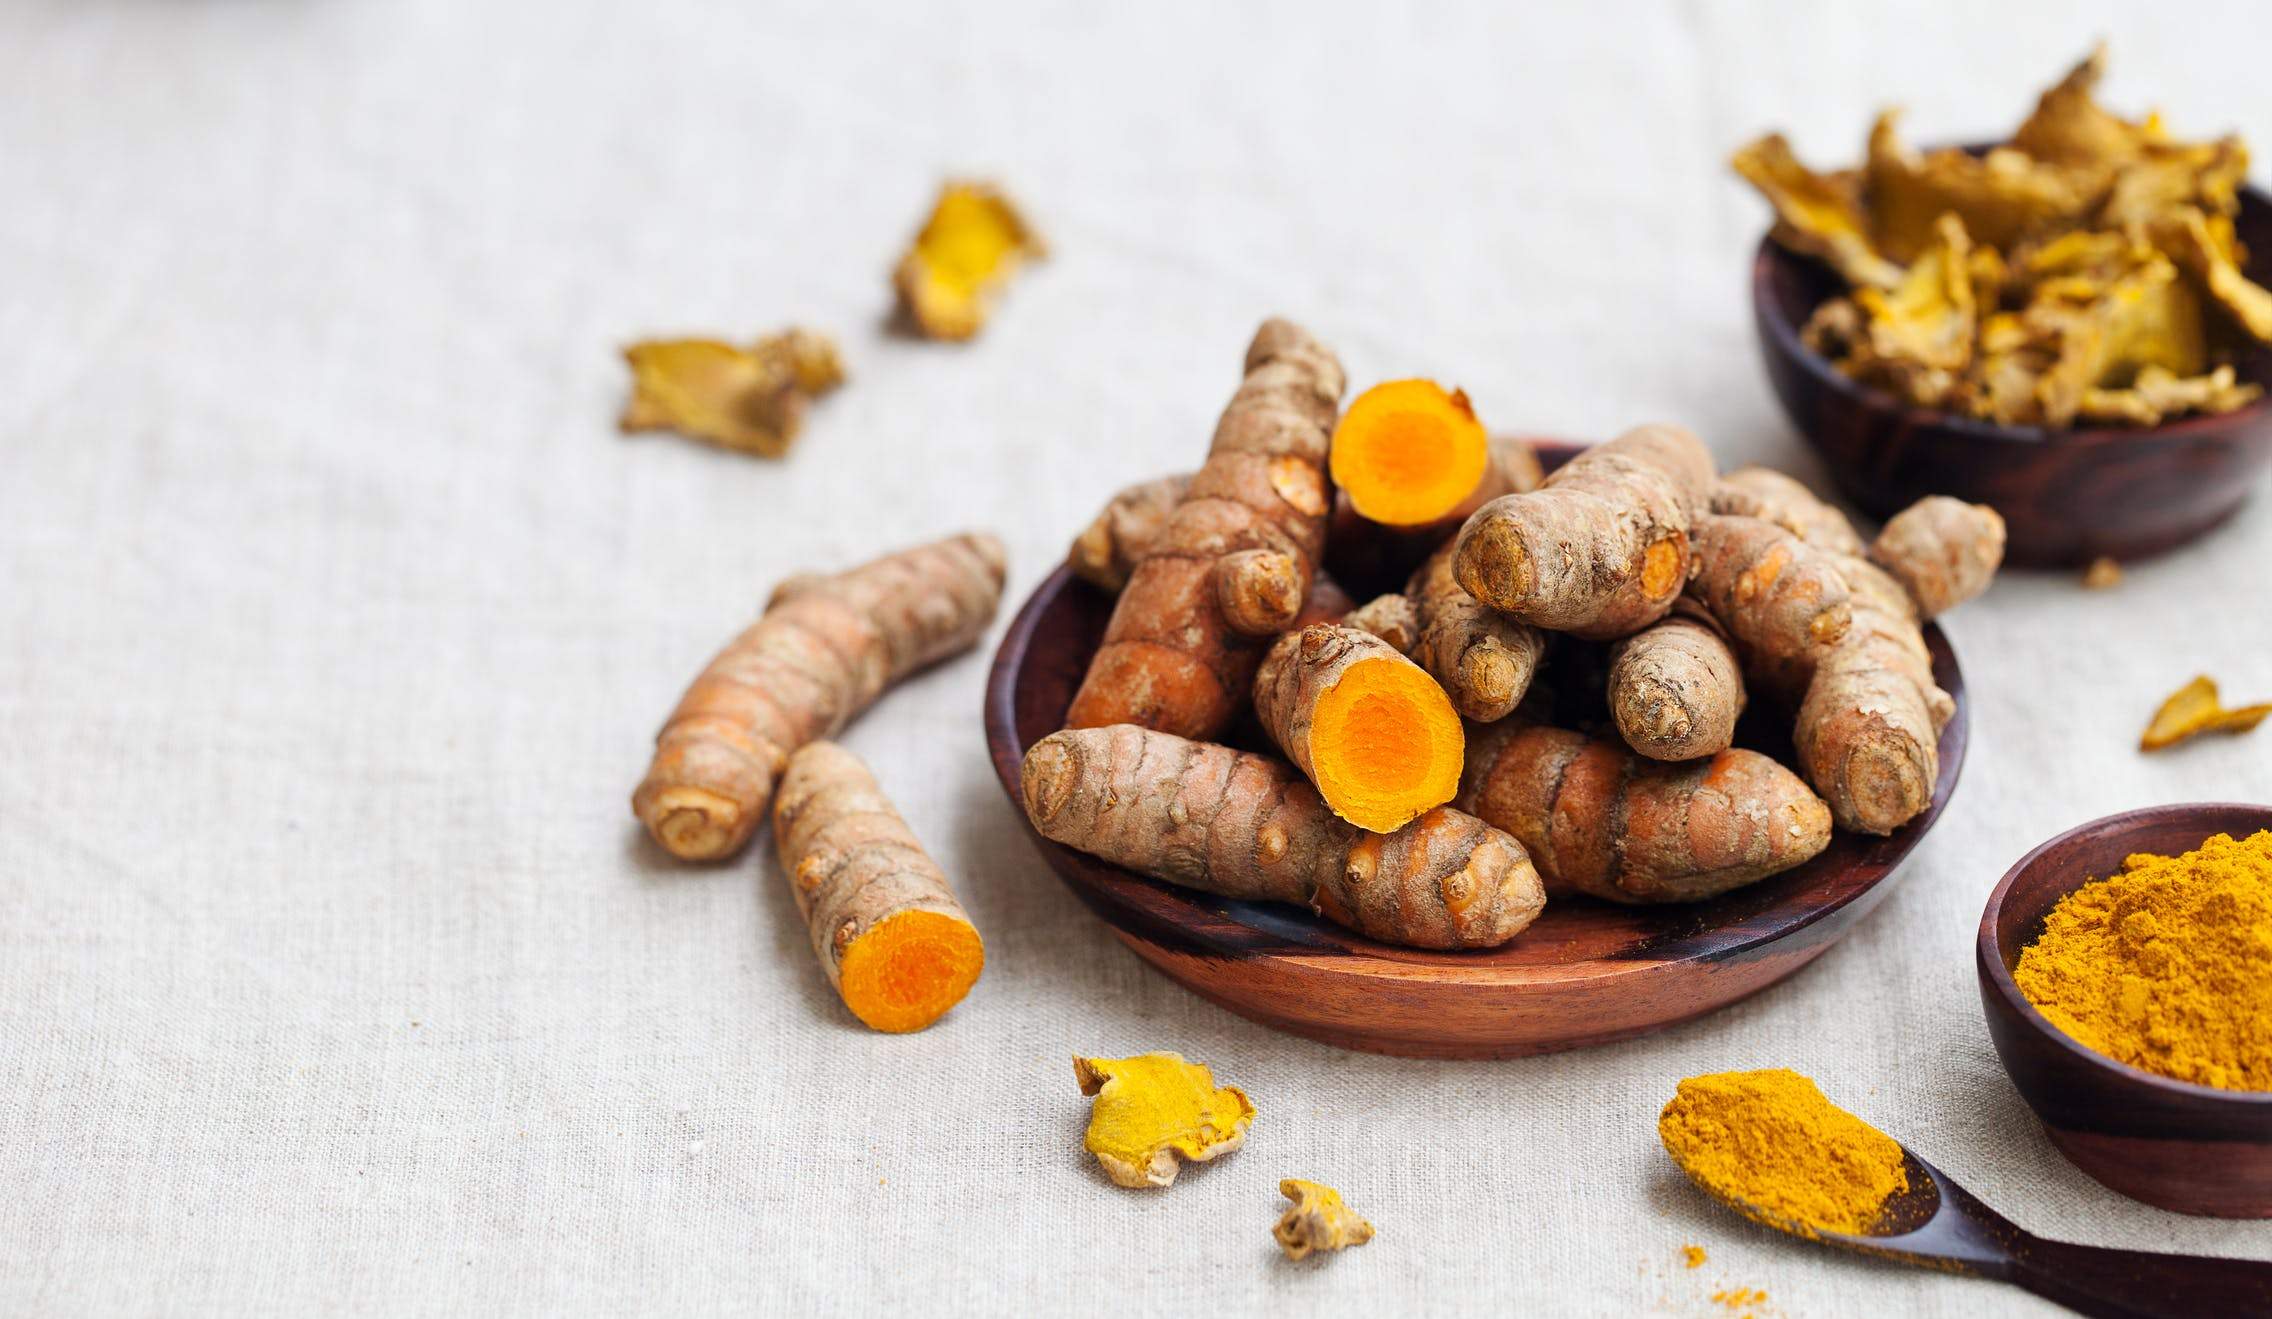 Curcumin: The Superfood That Improves Memory and Mood